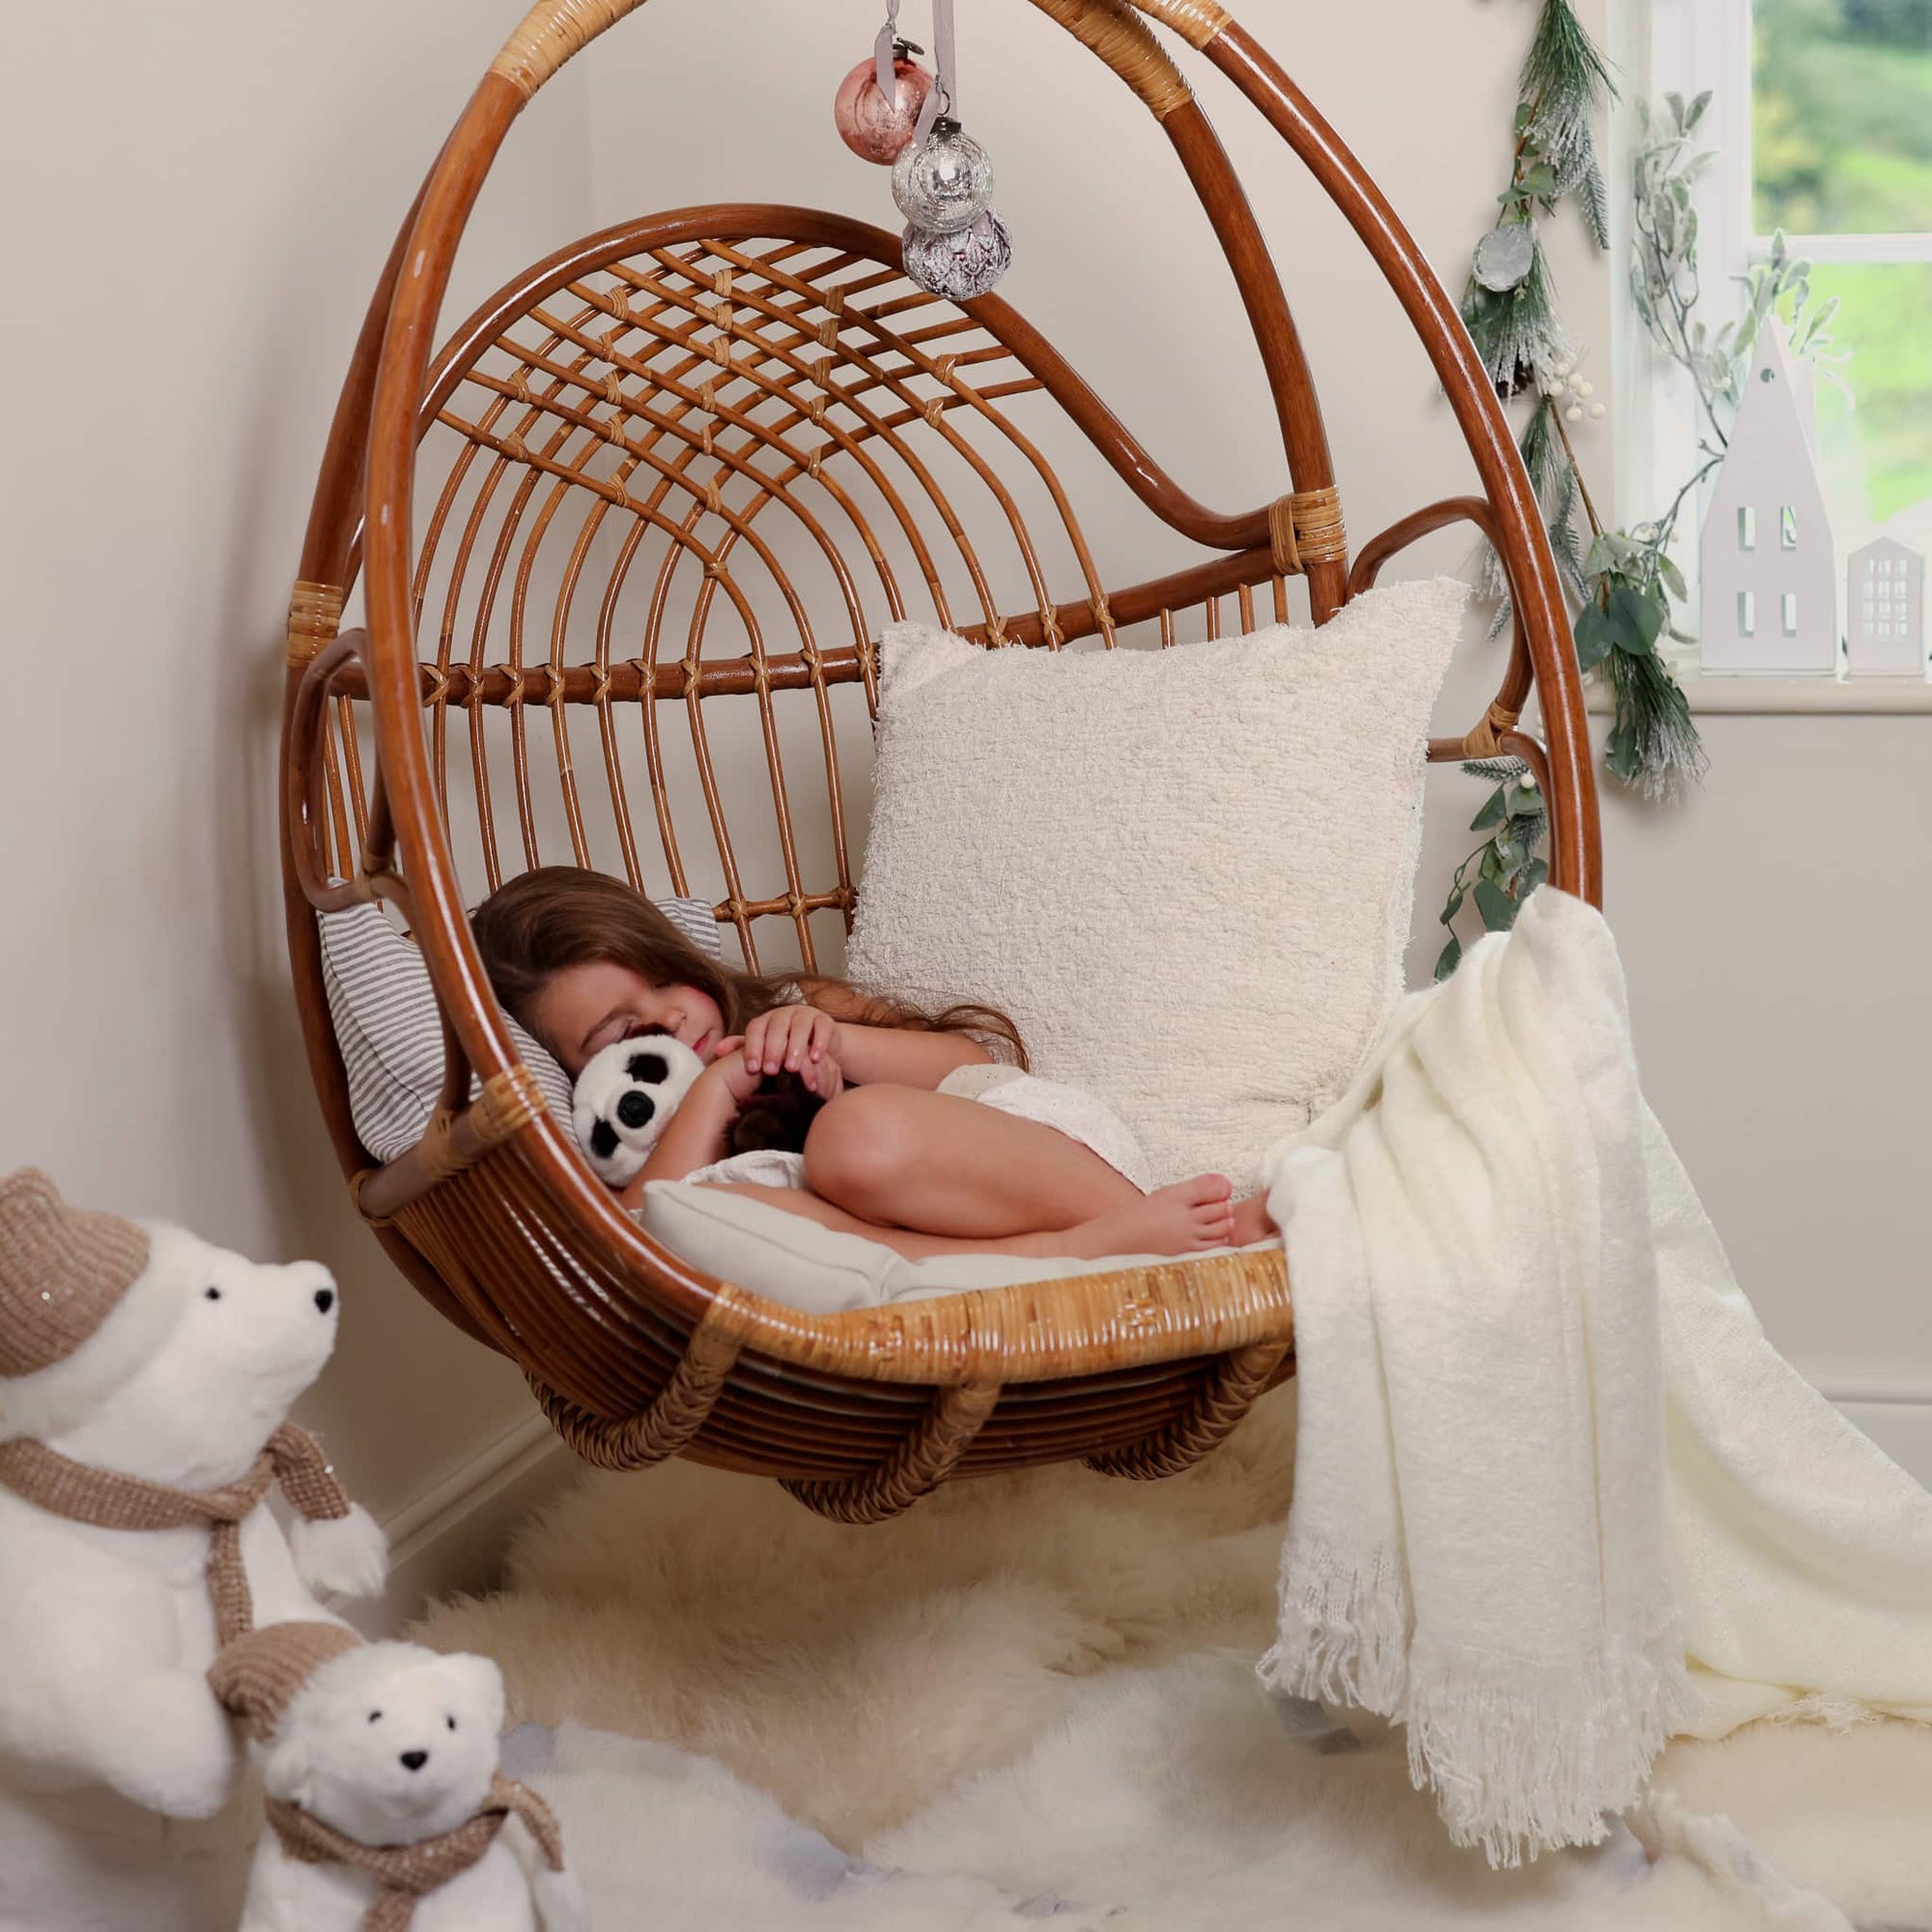 Natural rattan hanging chair for bedroom, with cushions and throw draped over and girl curled up with teddy.